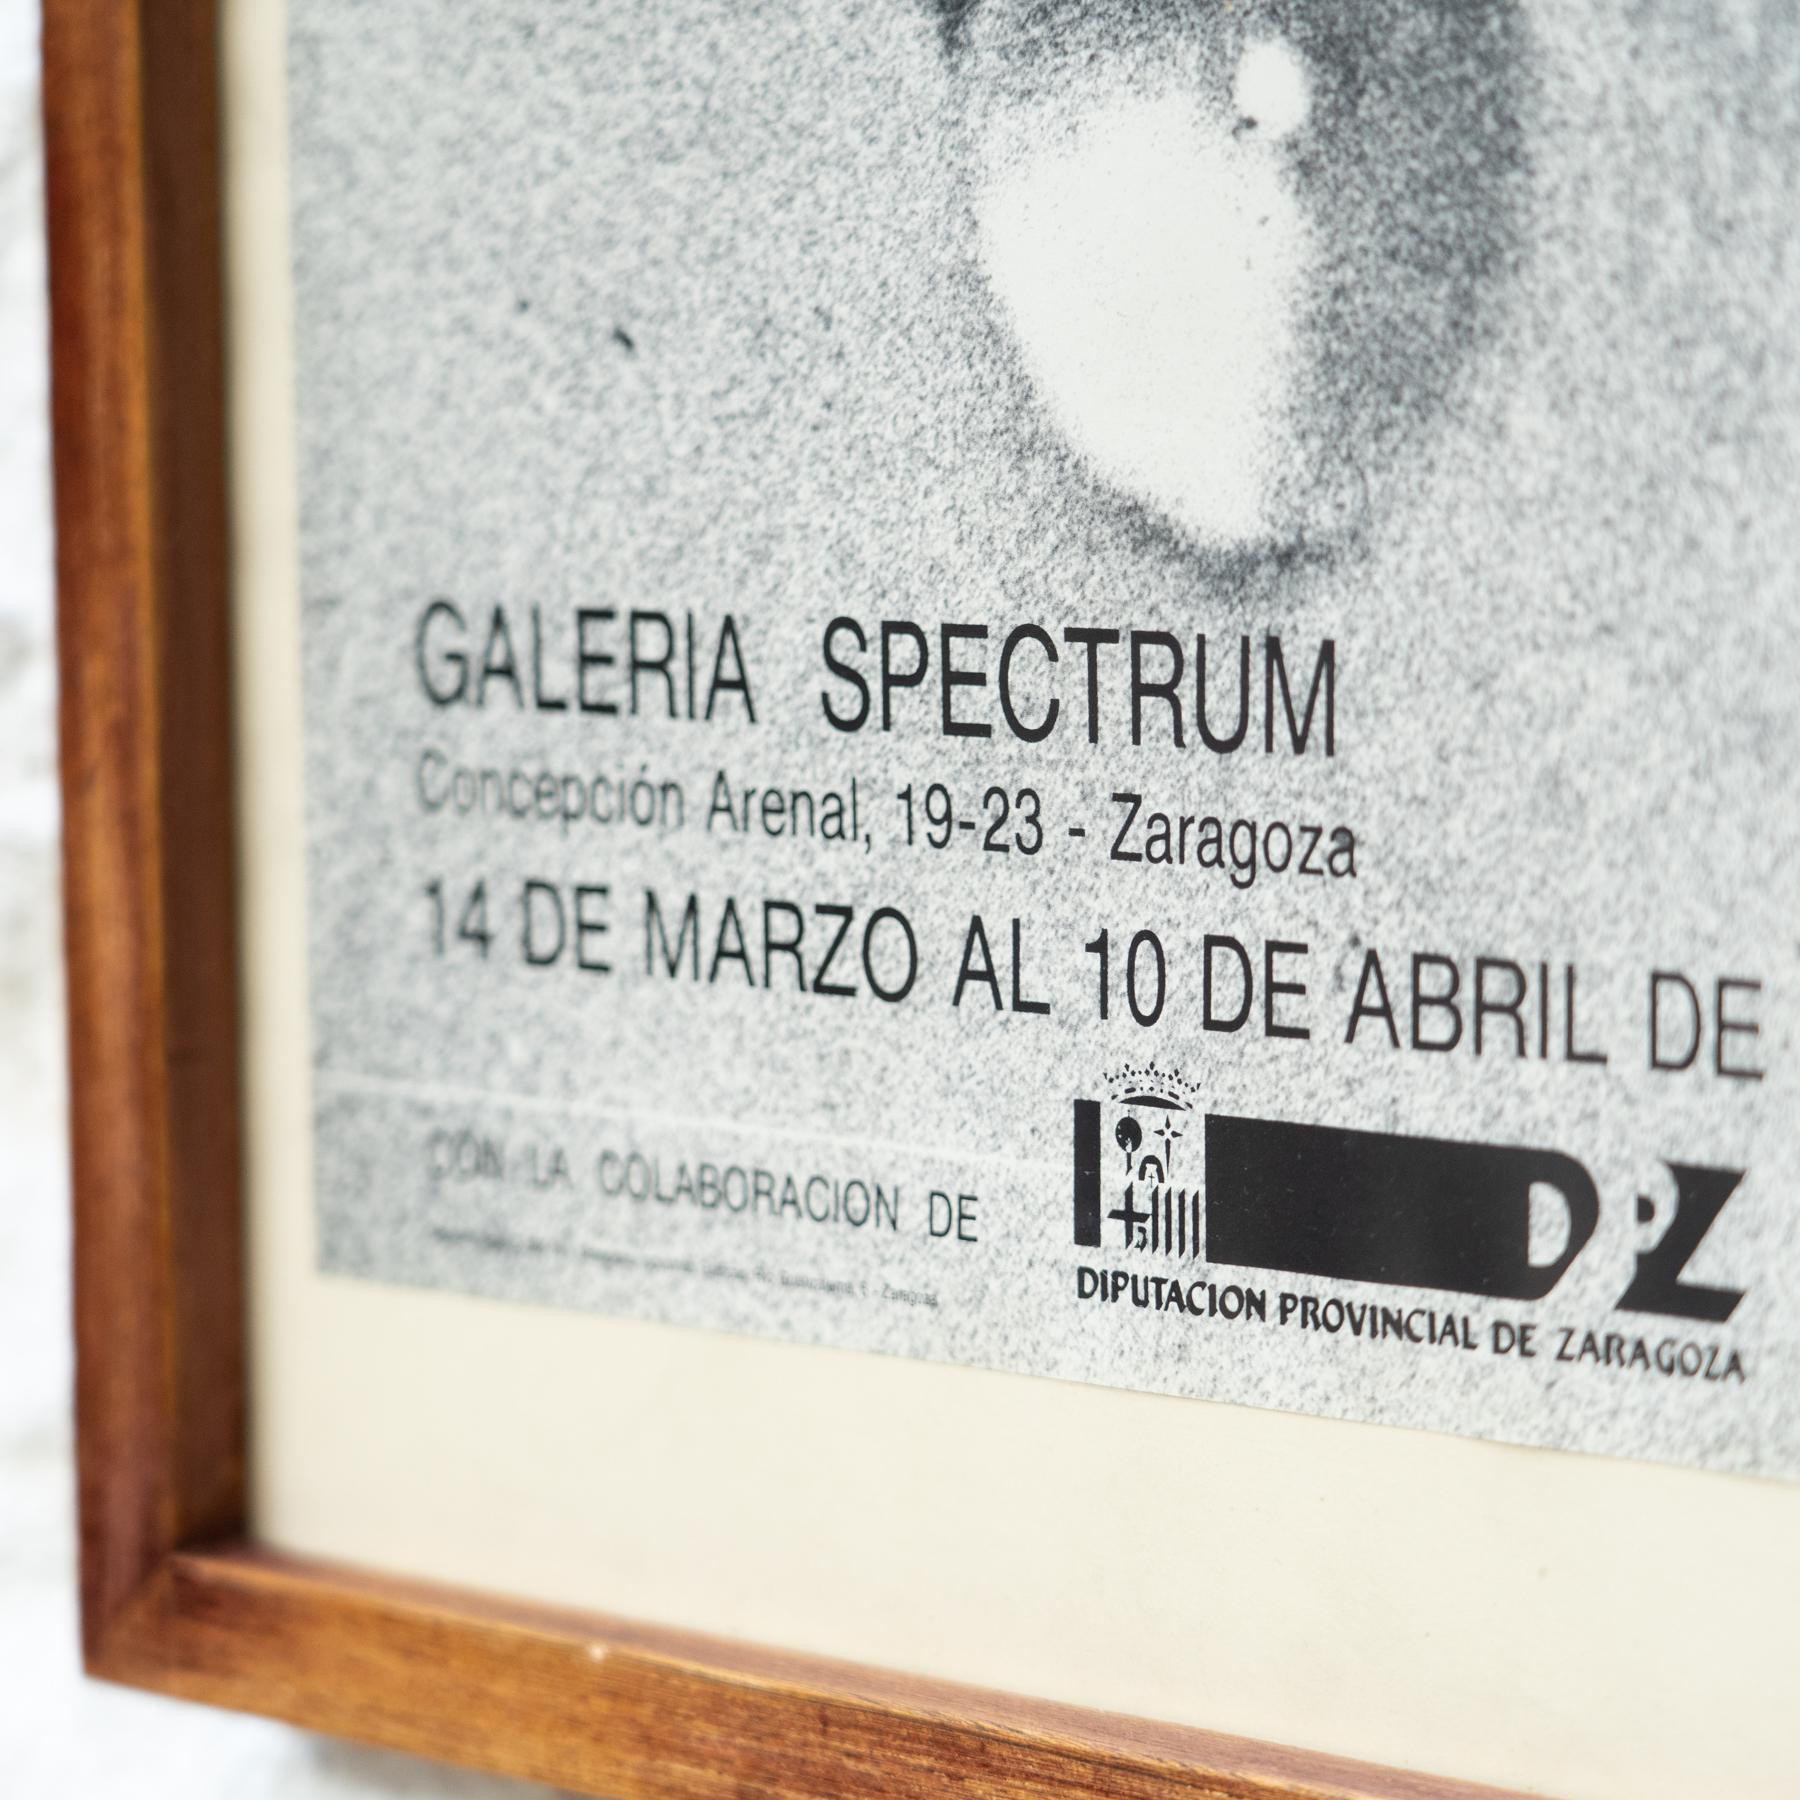 Framed Poster of Man Ray Exhibition in Galeria Spectrum Zaragoza, 1986 In Good Condition For Sale In Barcelona, ES